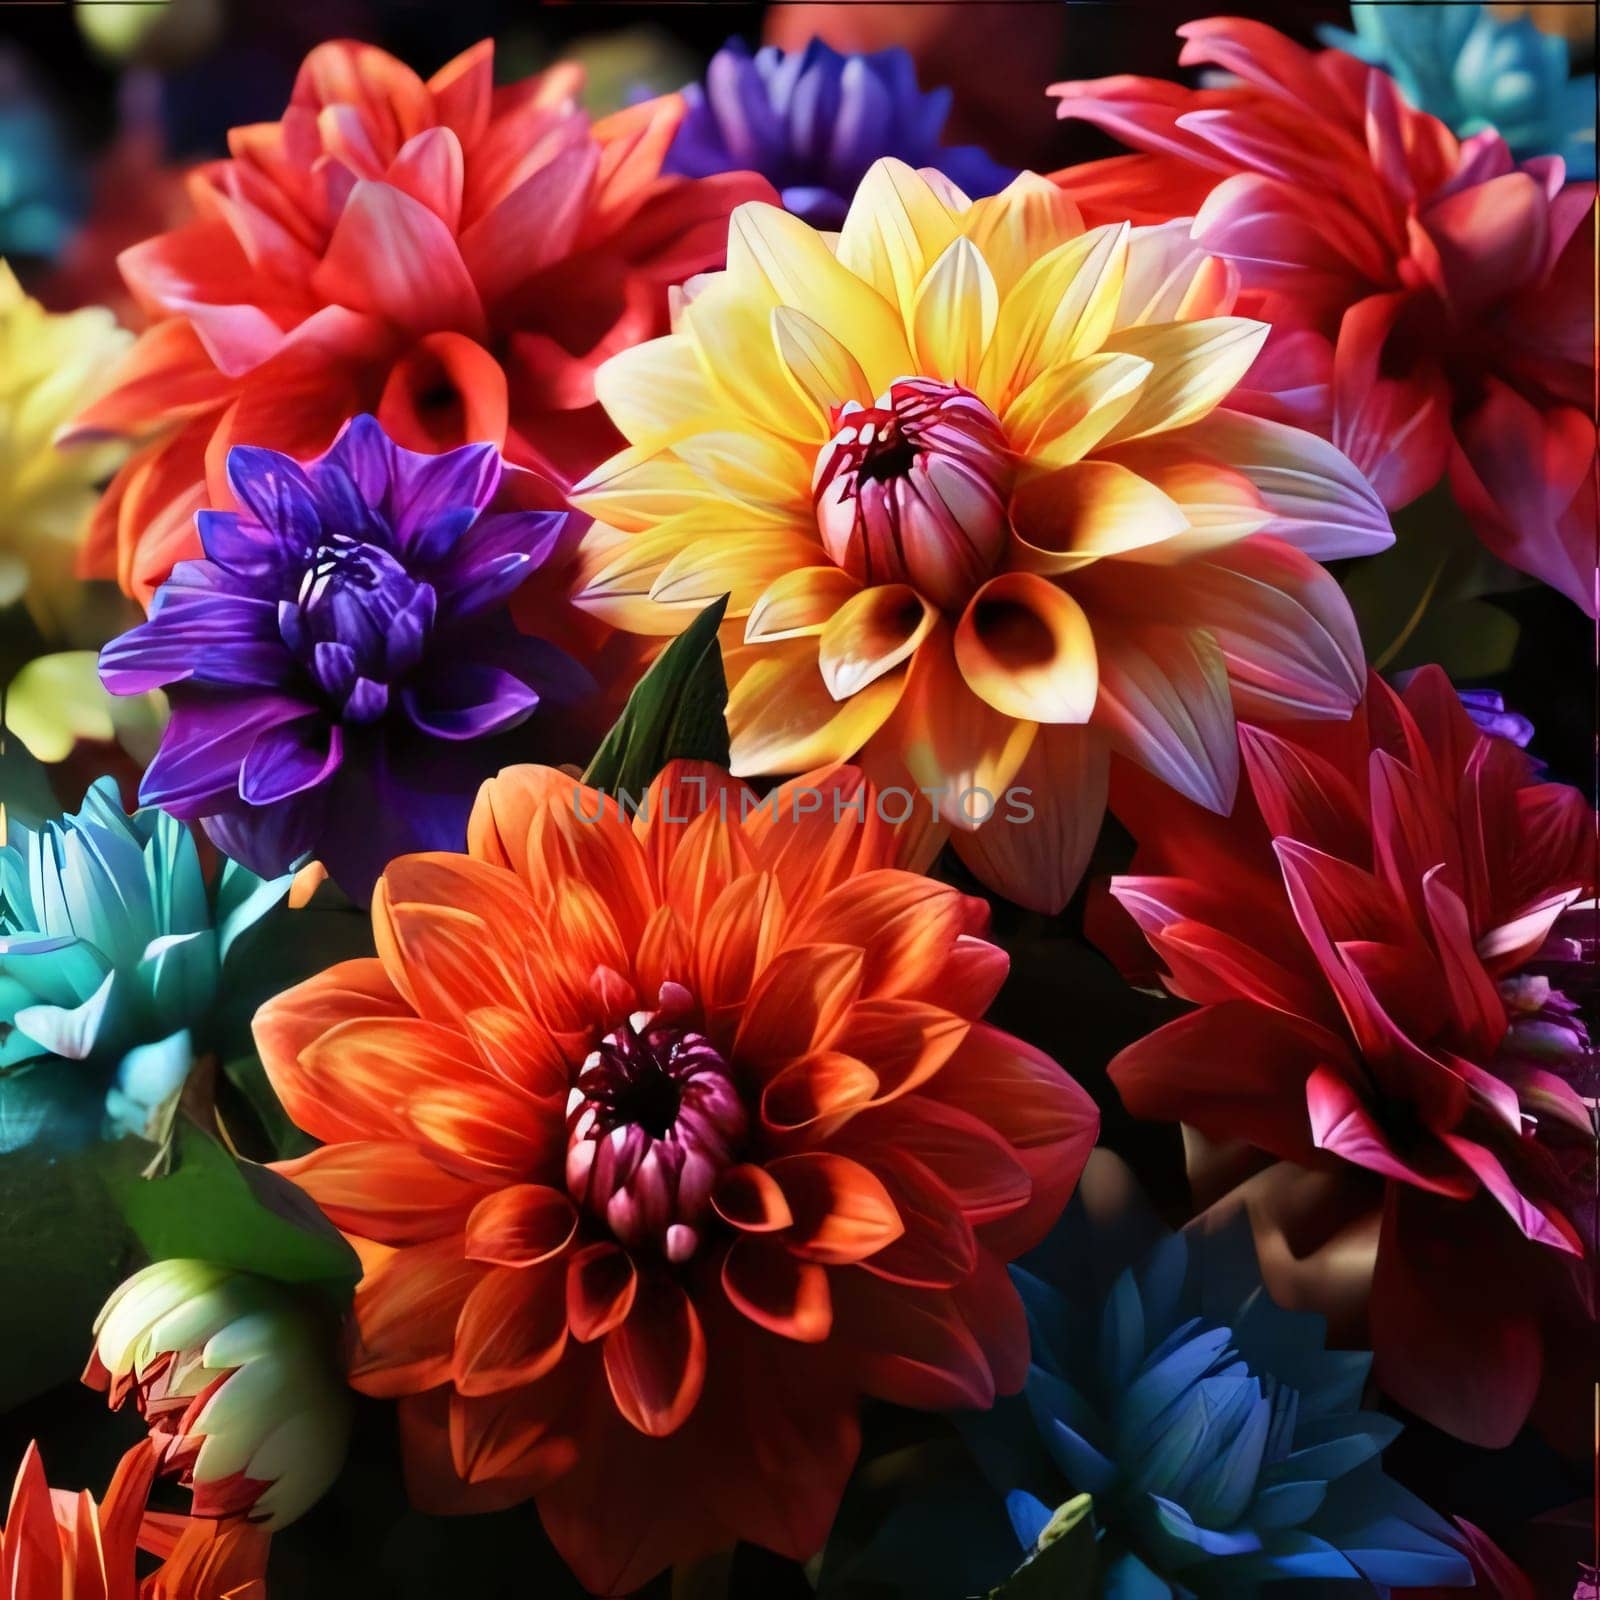 Top view of colorful rainbow heads, flower petals. Flowering flowers, a symbol of spring, new life. by ThemesS